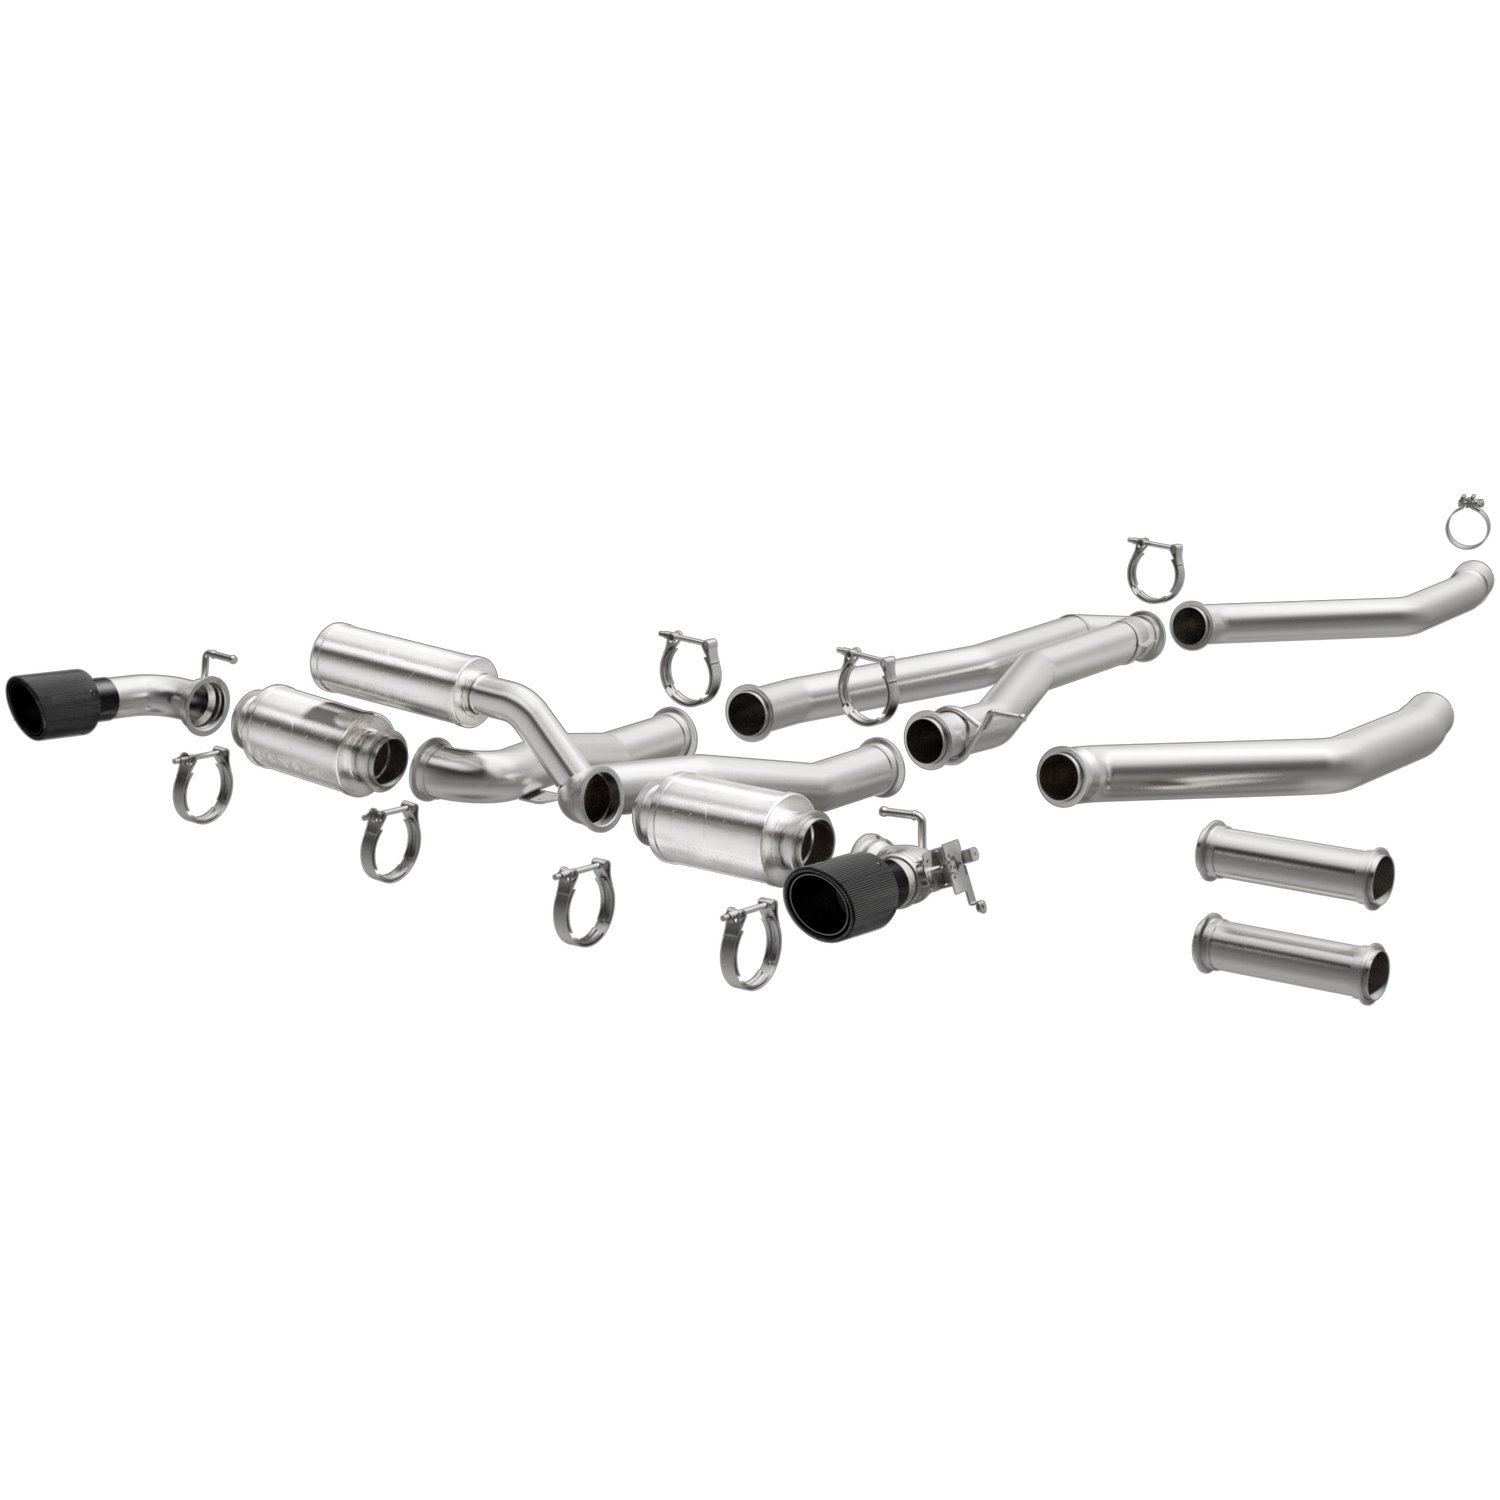 xMOD Series Cat-Back Exhaust System Fits Select Late-Model